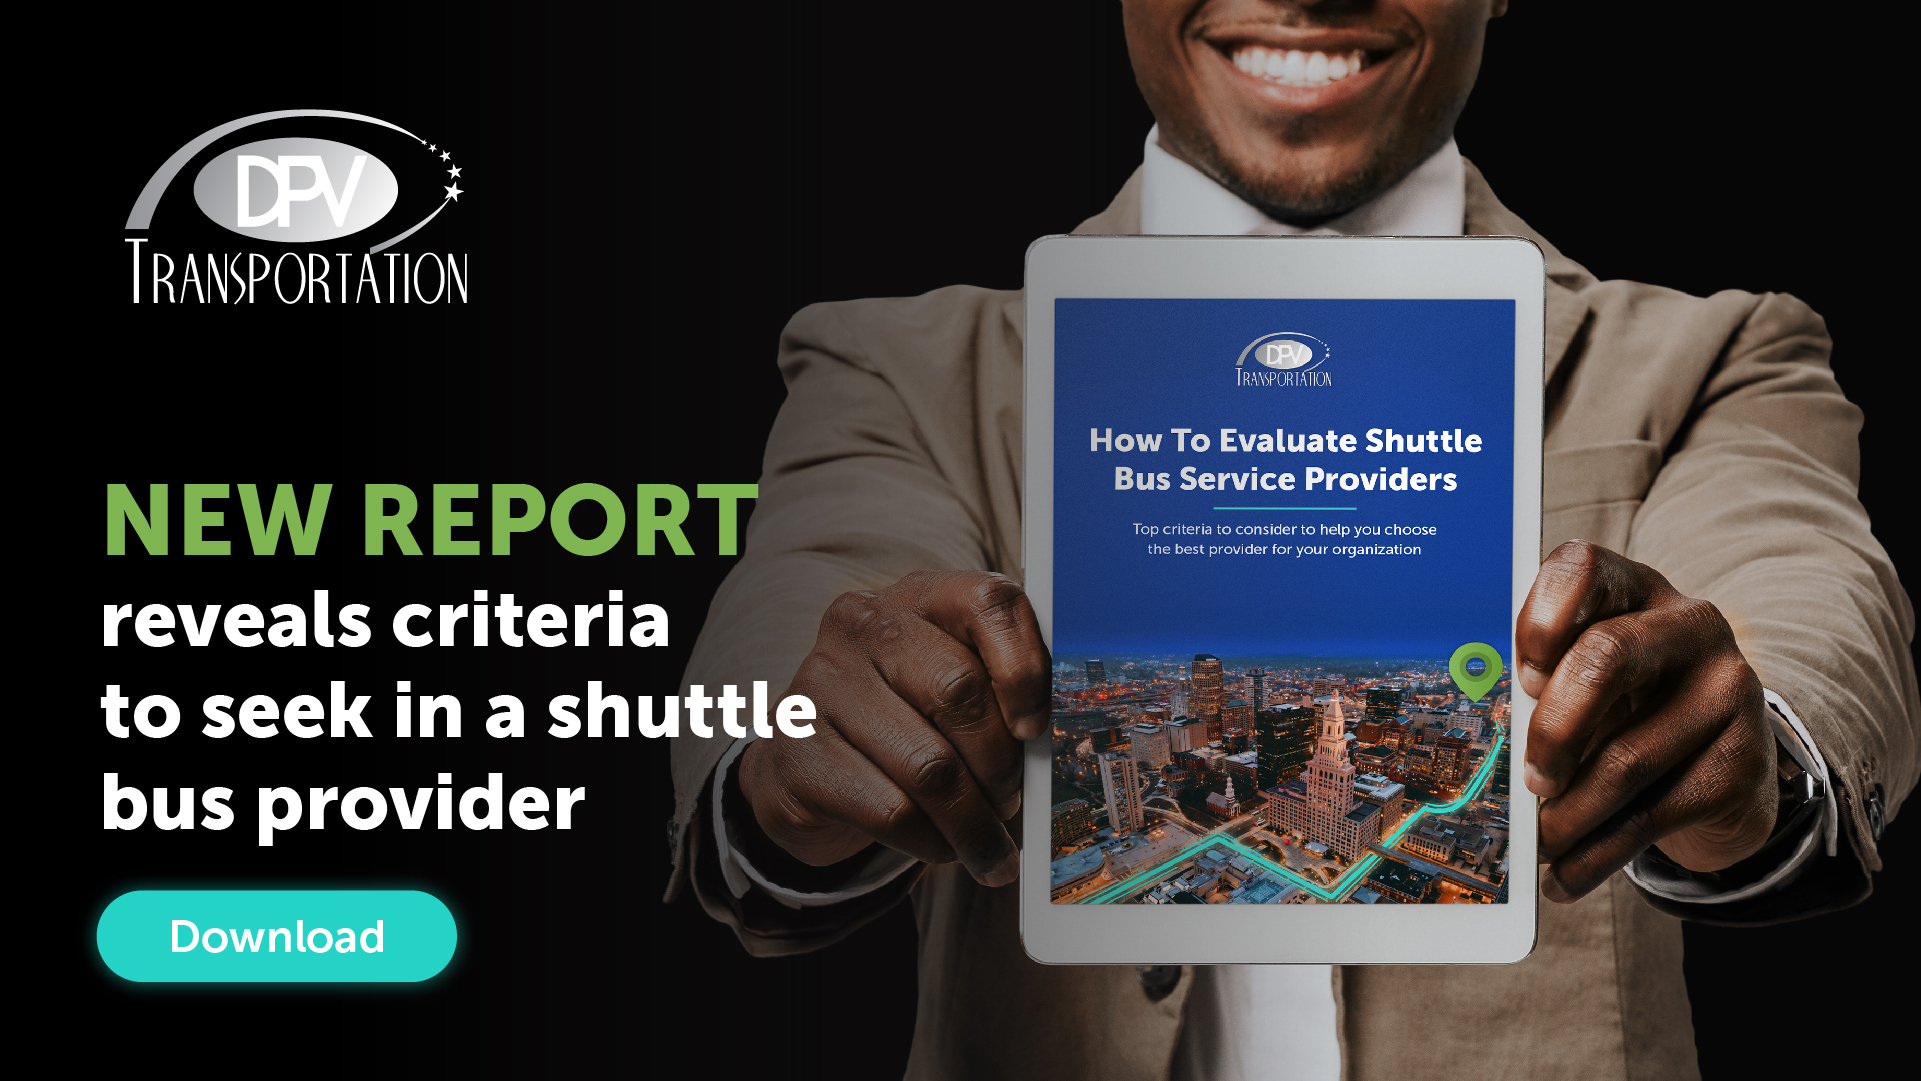 How To Evaluate Shuttle Bus Providers